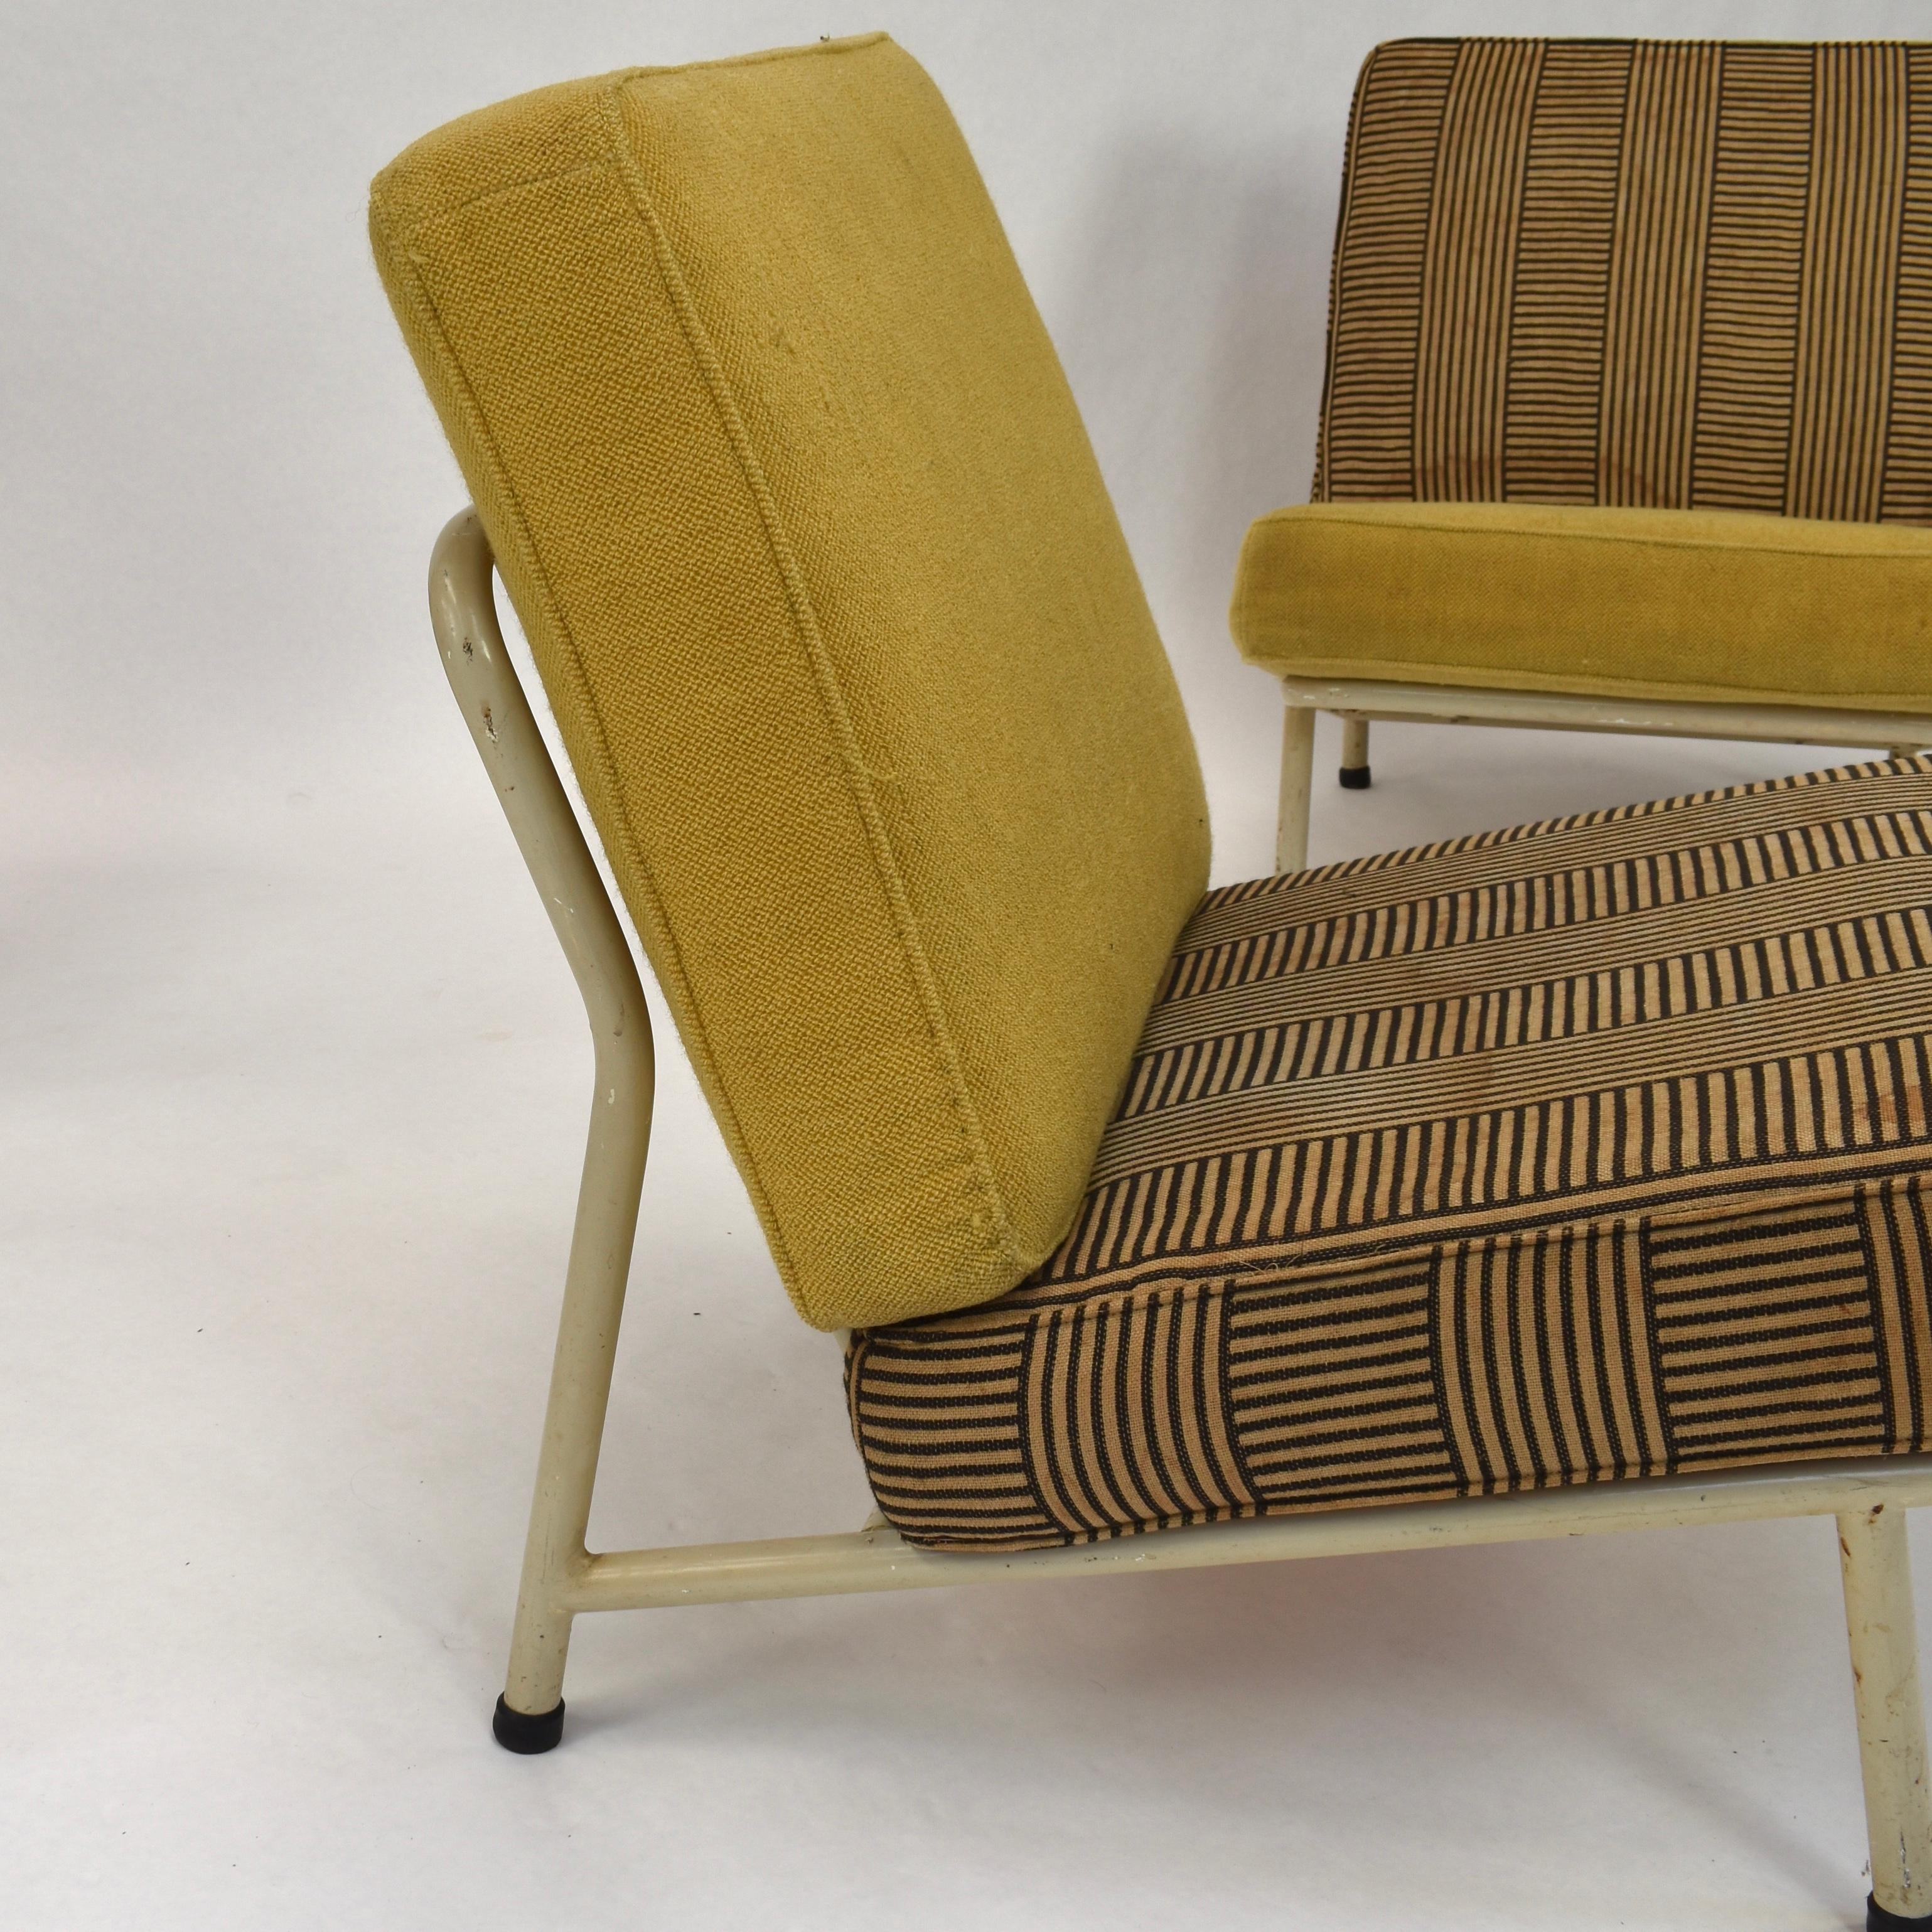 Mid-20th Century Set of Three Alf Svensson Lounge Chairs for DUX, Sweden, circa 1950